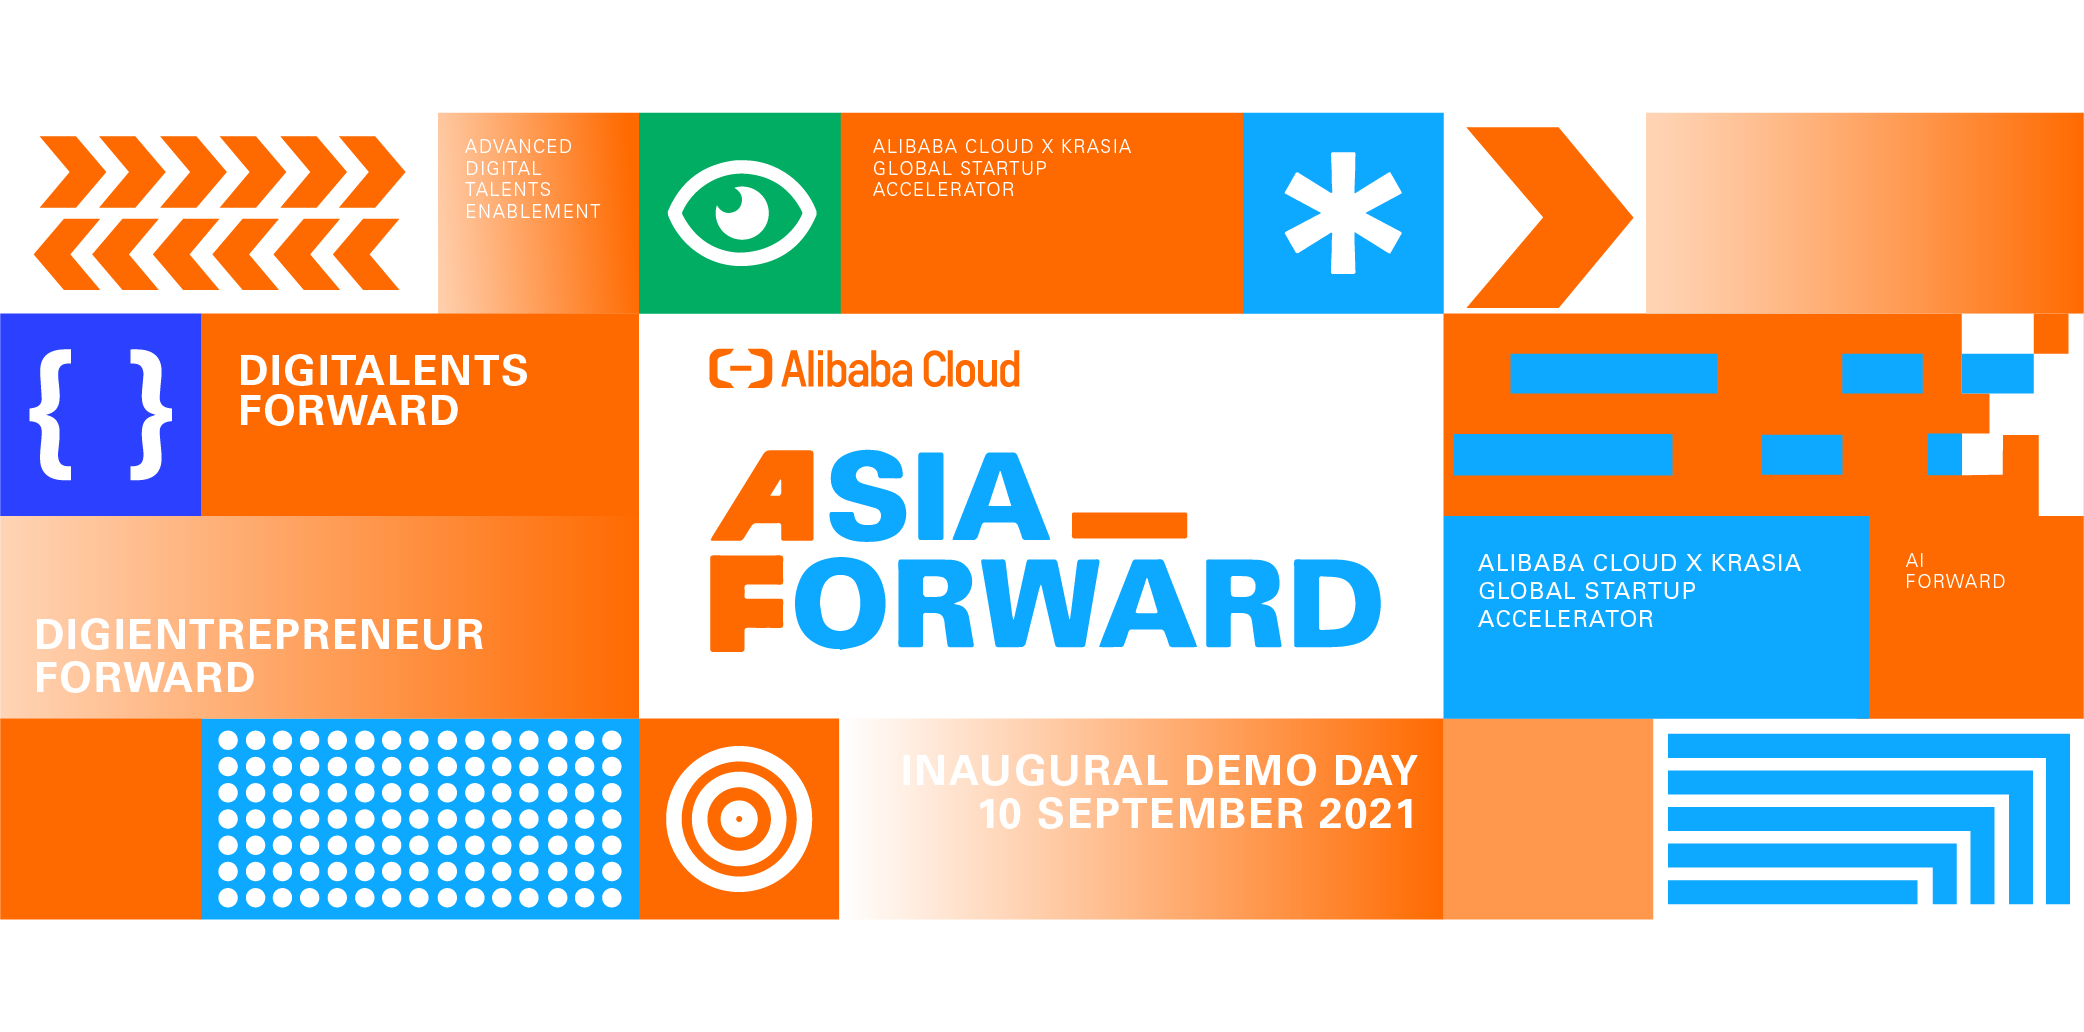 Register for a spot in Alibaba Cloud x KrASIA’s Global Startup Accelerator Demo Day